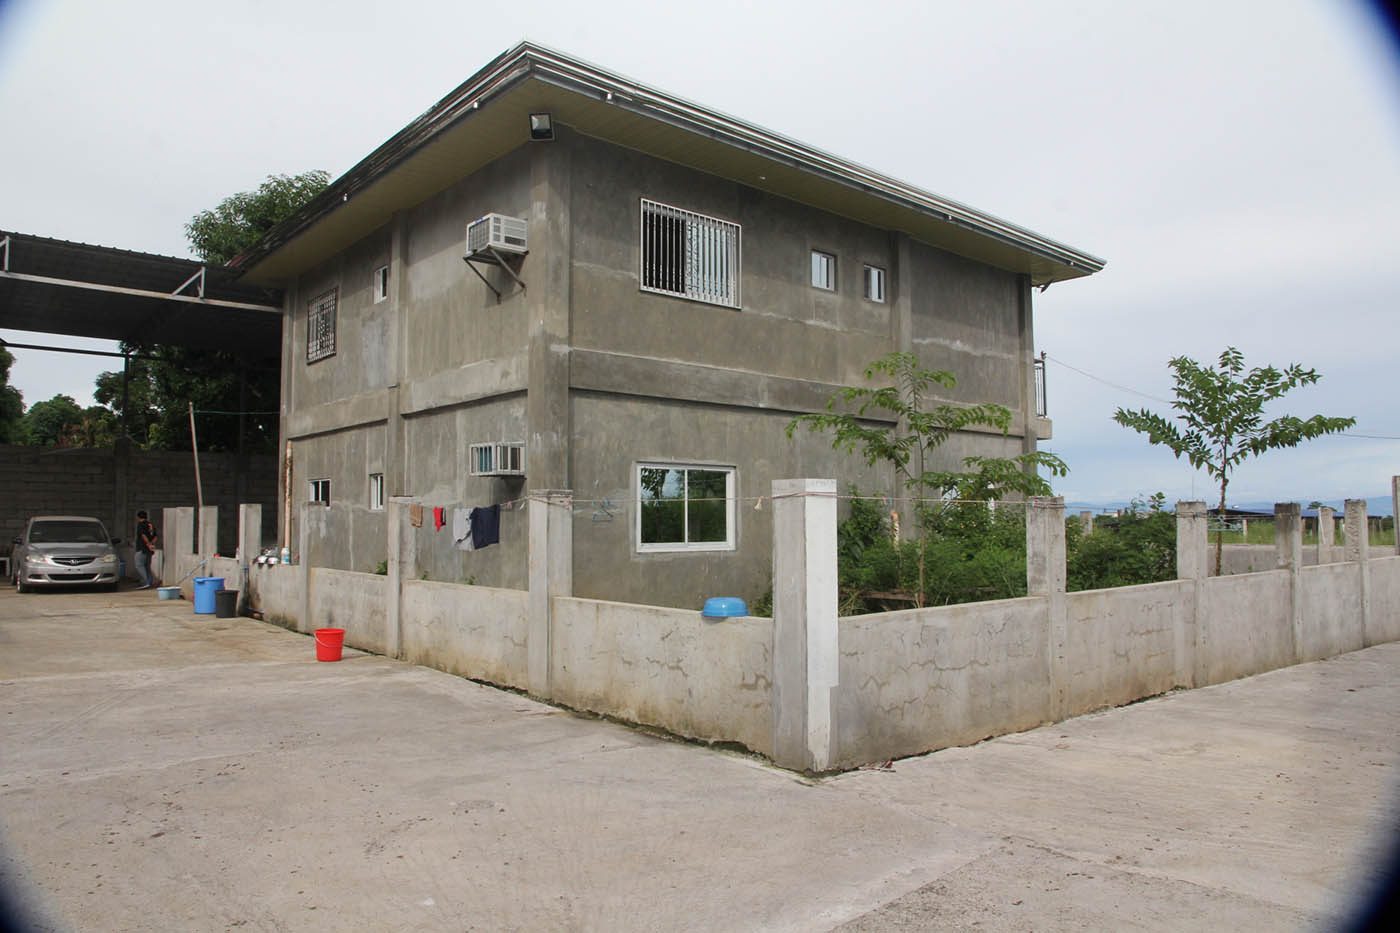 The two-storey house equipped with air-conditioning units beside the warehouse. Photo by Jun A. Malig 